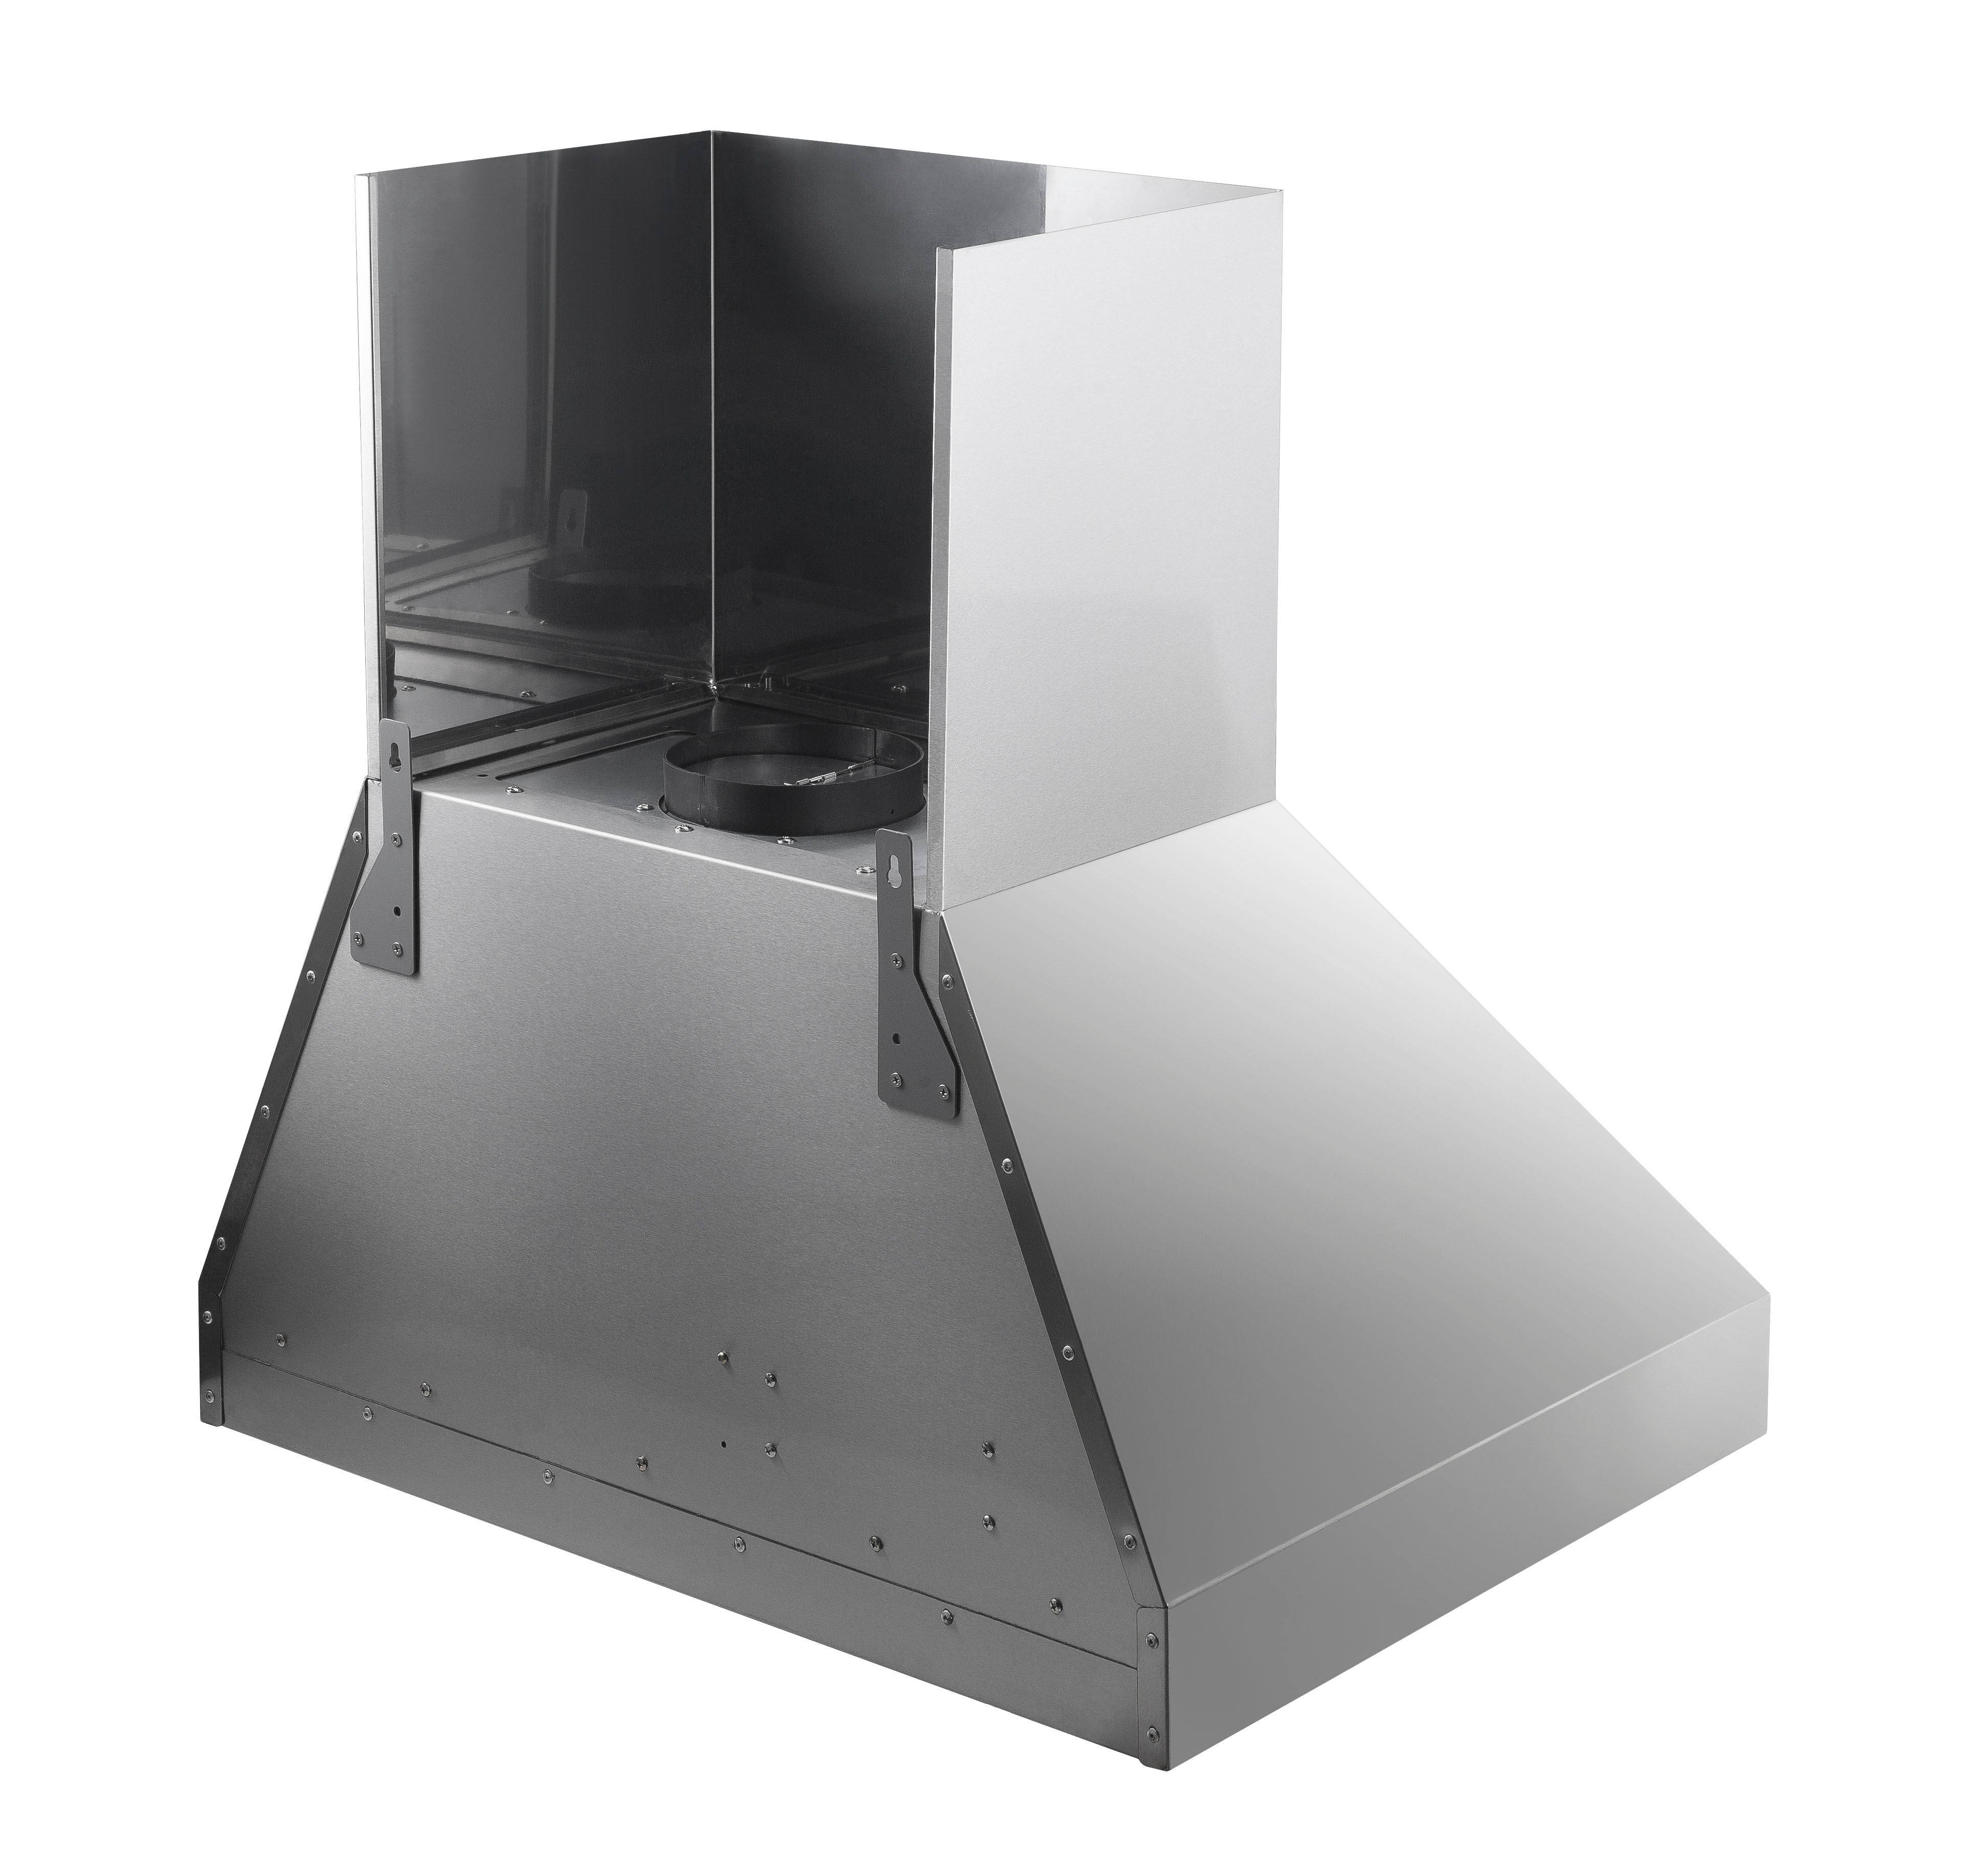 WPRO30 Wall Mount 30 in. Pyramid Ducted Range Hood